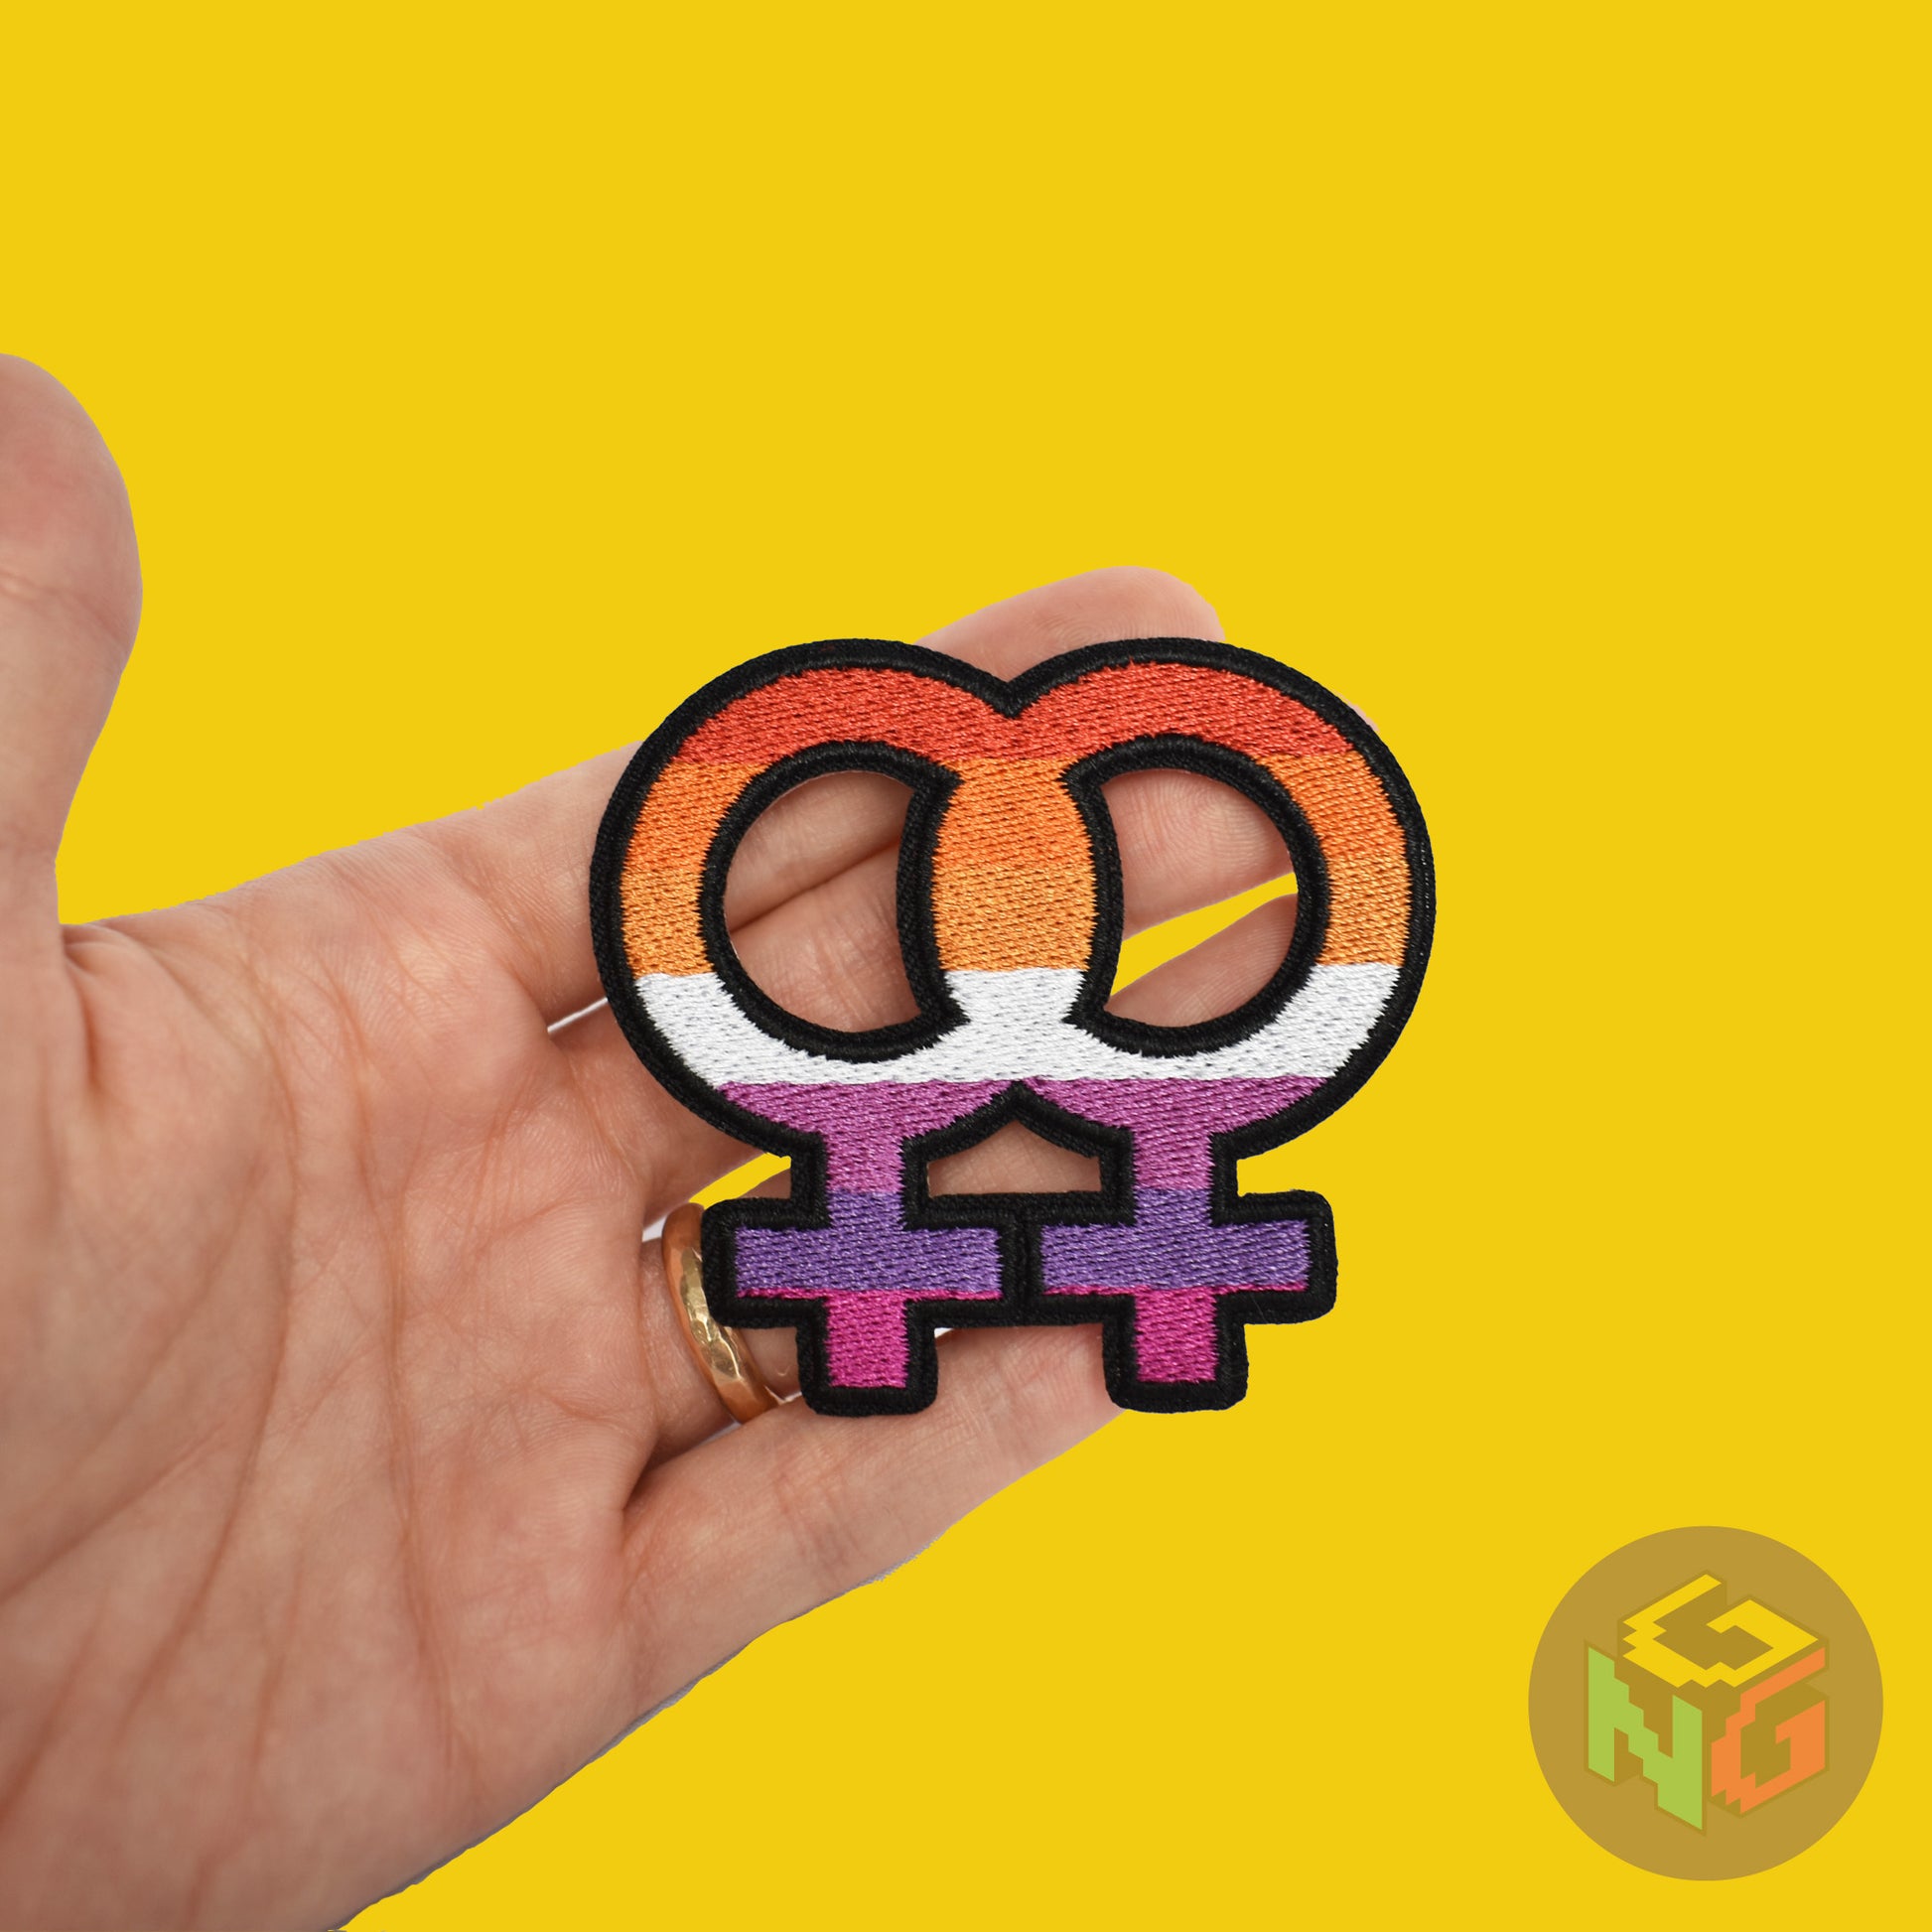 lesbian iron on patch held in hand against yellow background